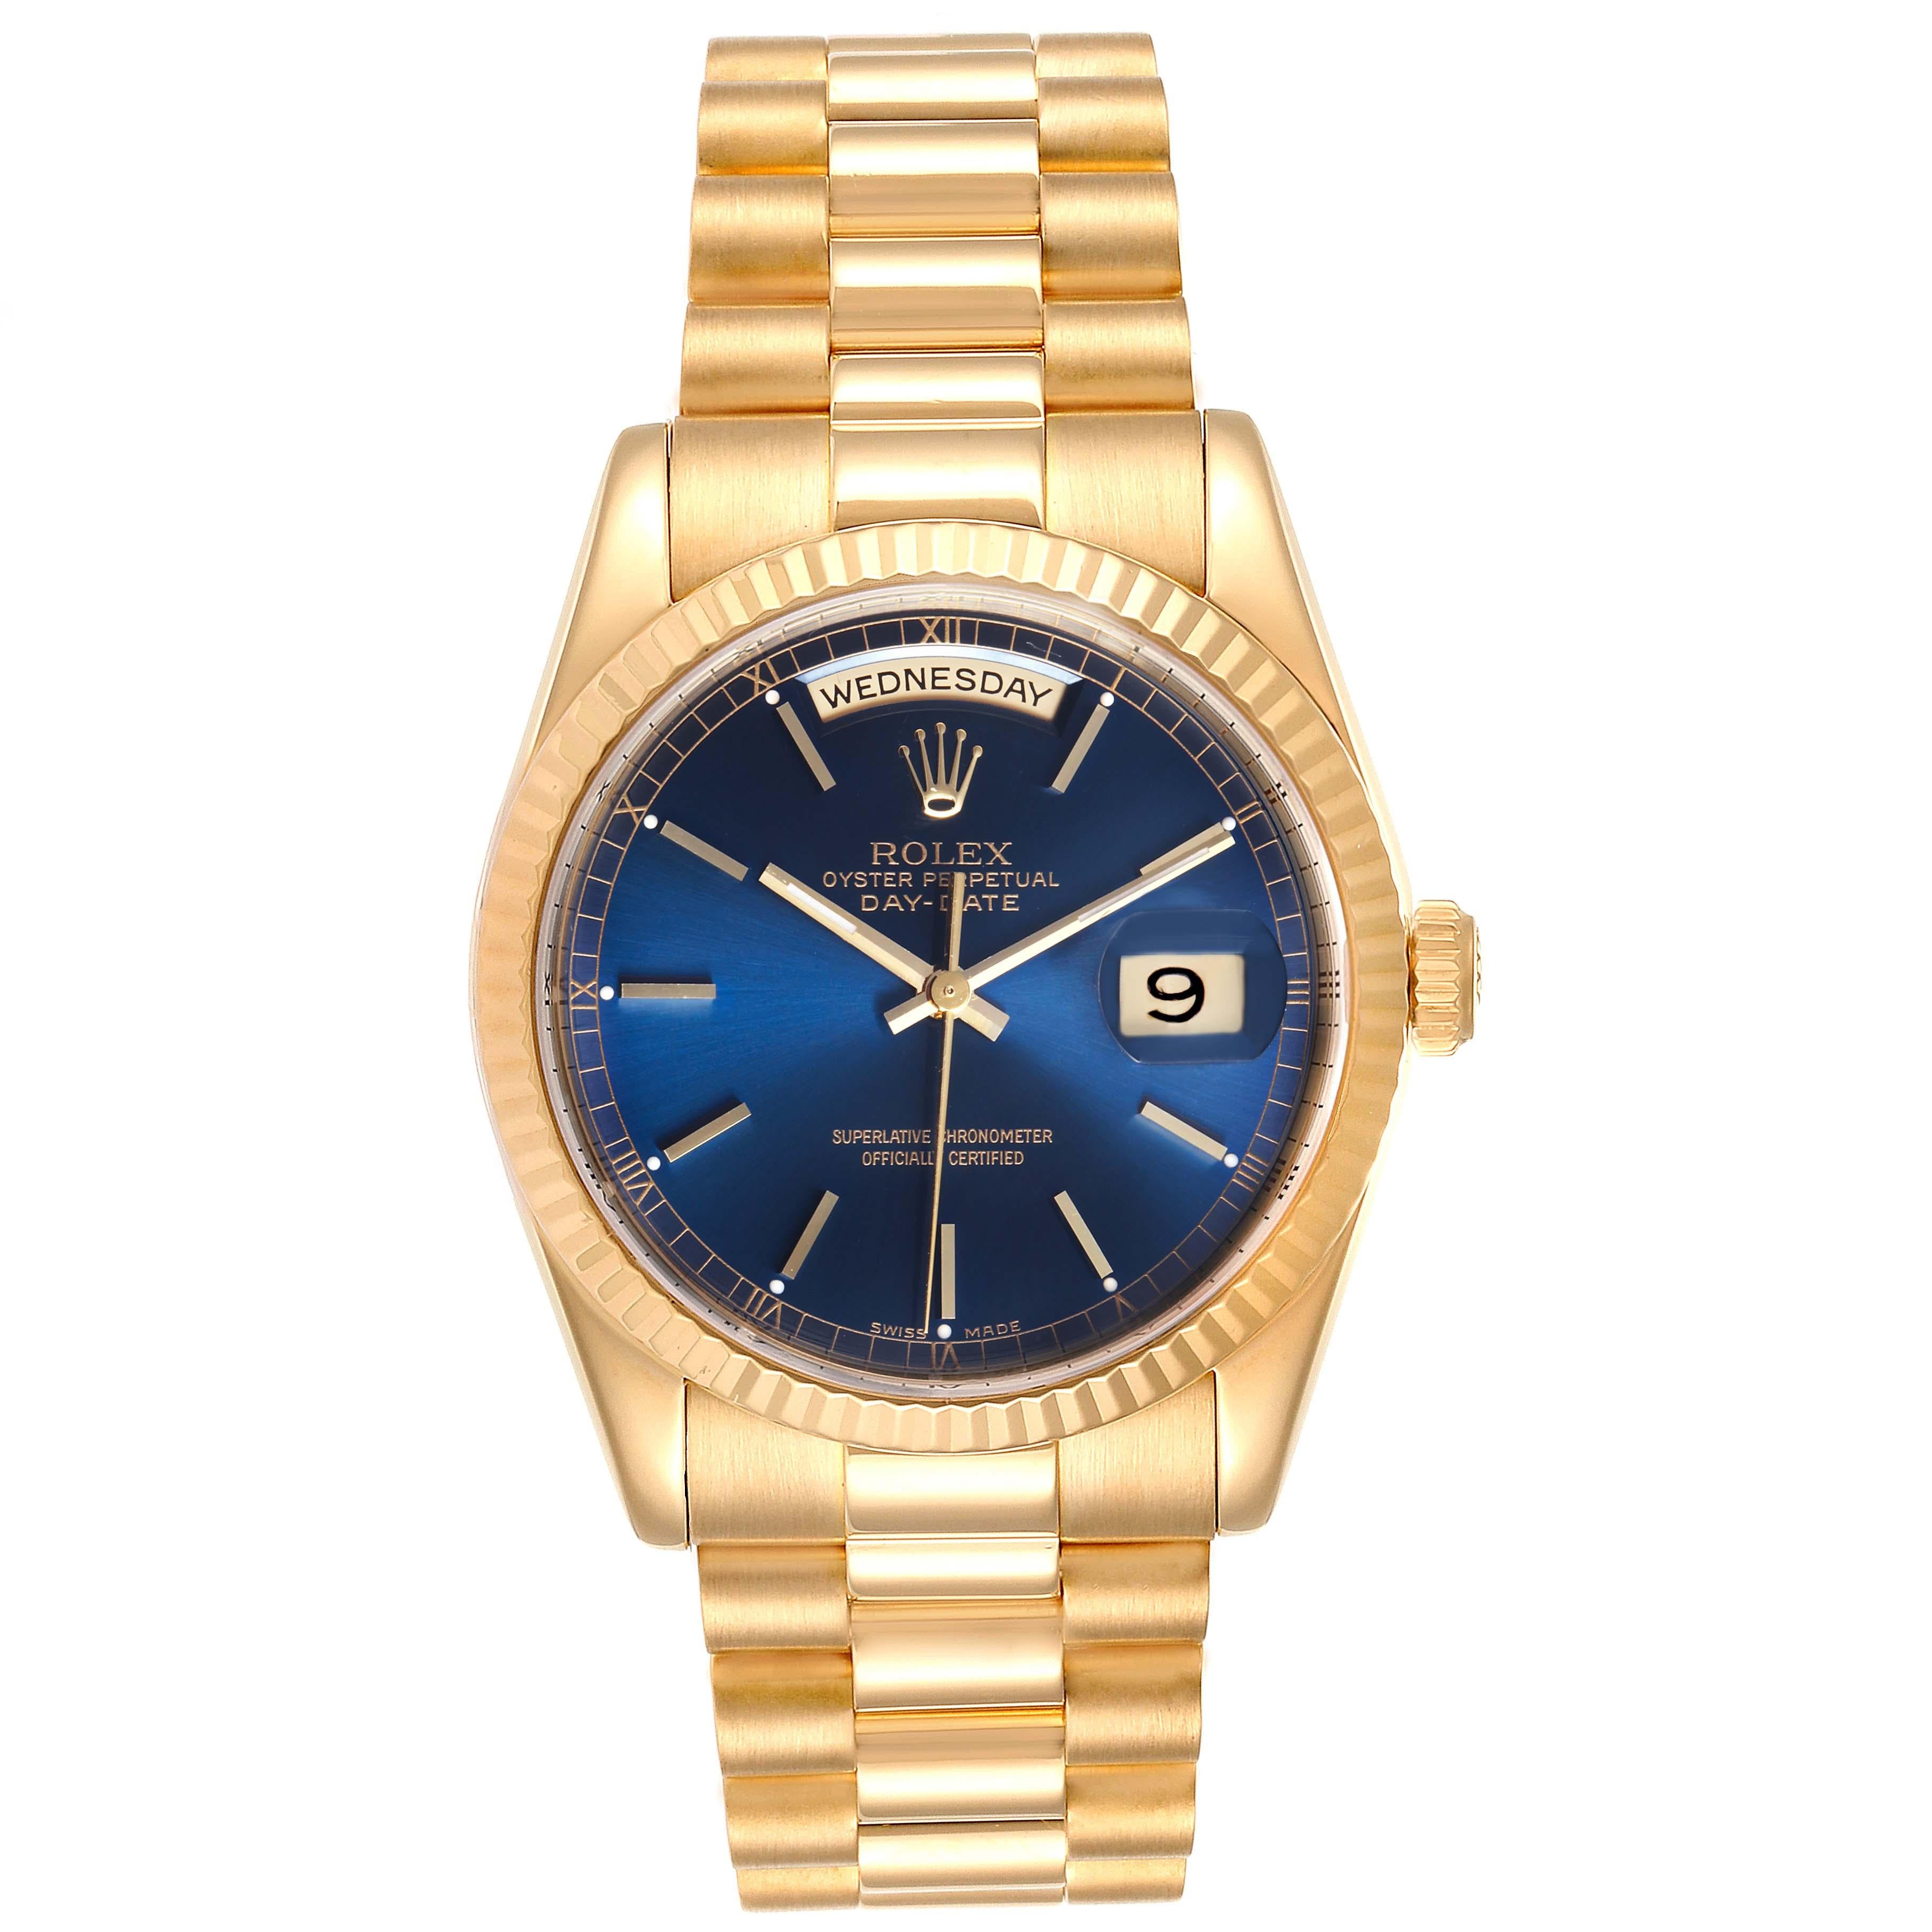 Rolex President Day-Date Blue Dial Yellow Gold Mens Watch 118238. Officially certified chronometer self-winding movement. 18k yellow gold oyster case 36.0 mm in diameter. Rolex logo on a crown. 18K yellow gold fluted bezel. Scratch resistant